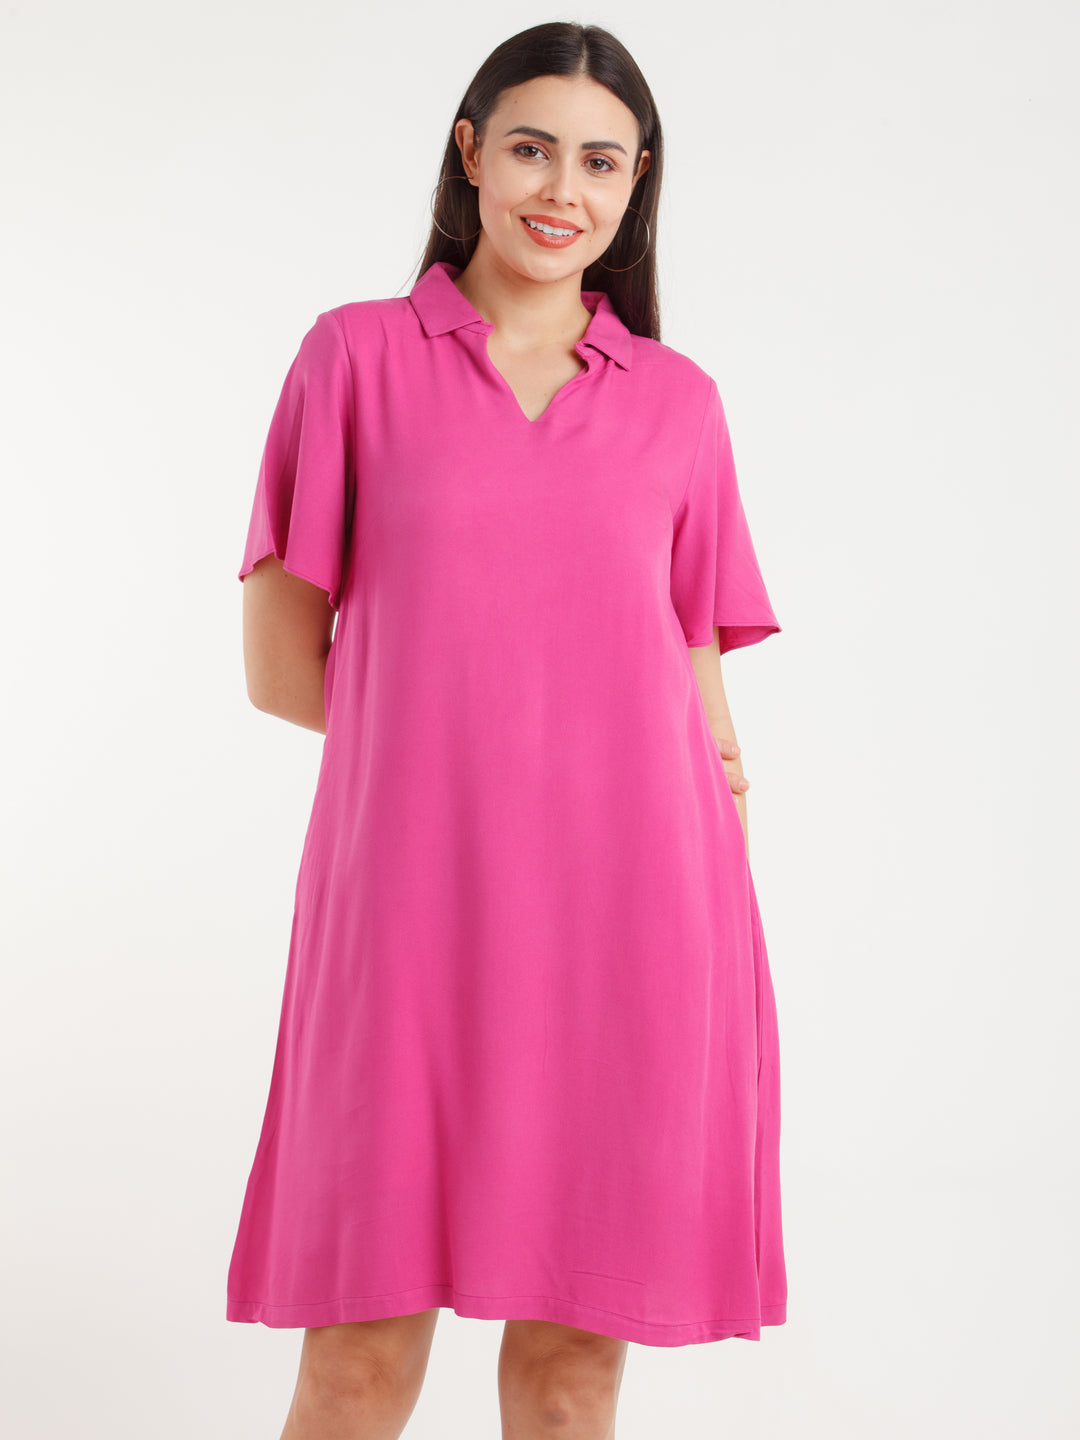 Pink Solid Mini Dress For Women